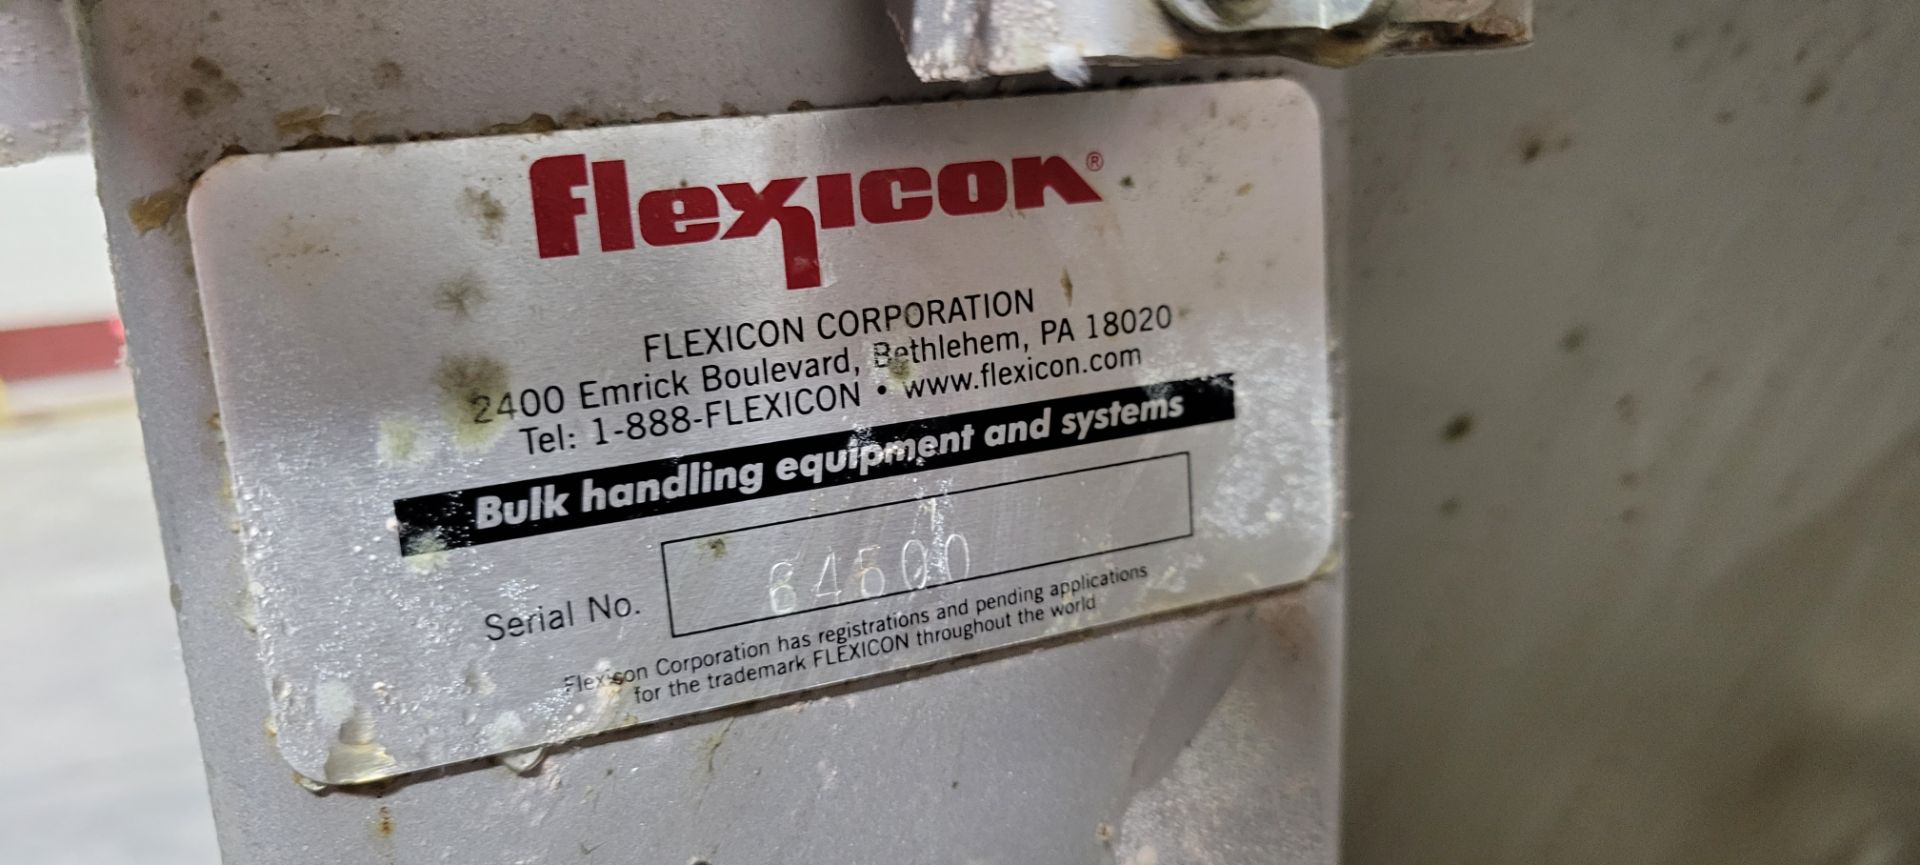 Flexicon Material Loading Station - Image 4 of 6